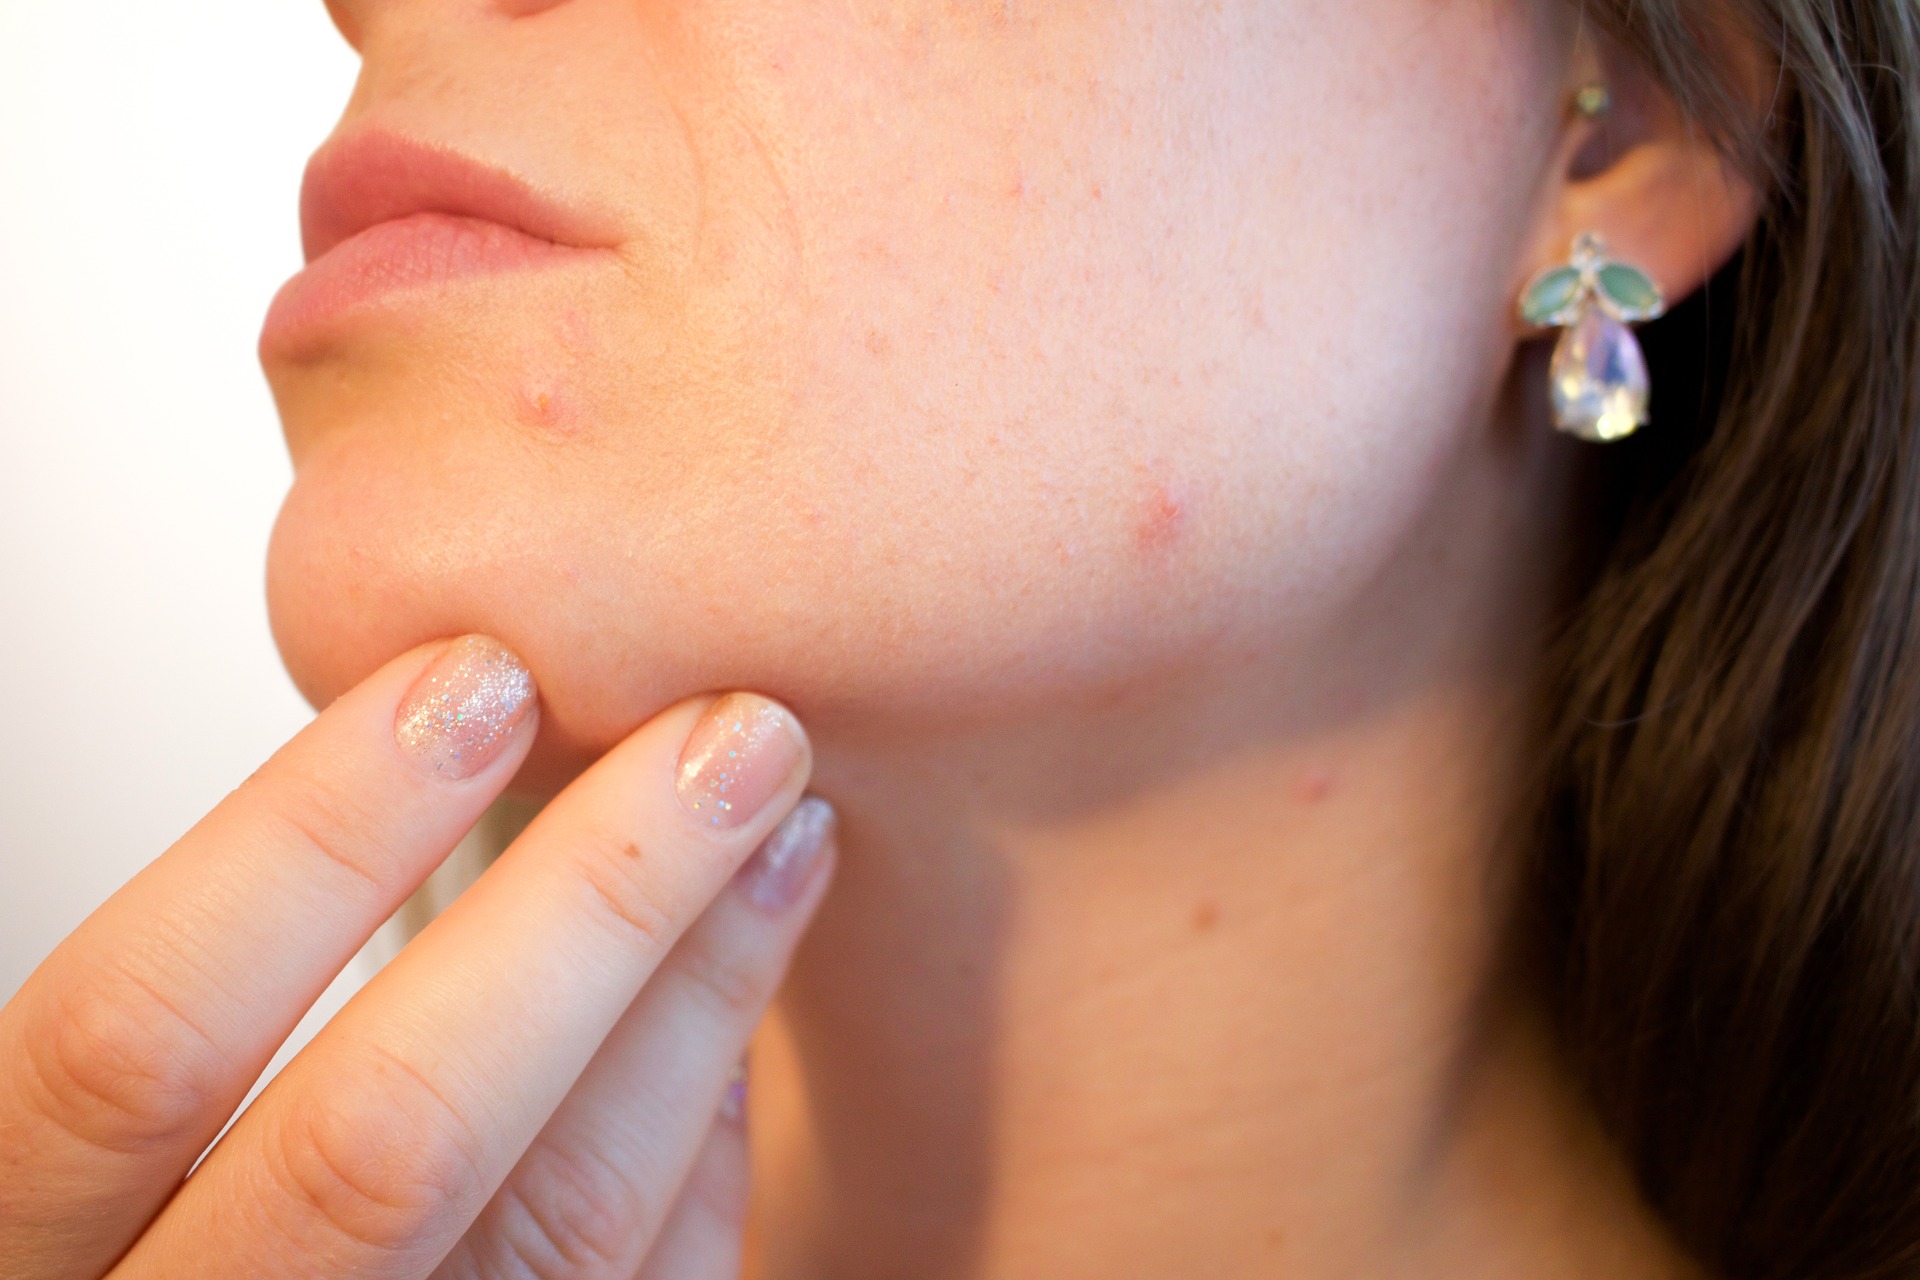 Know About Some Best Acne Scar Remedies